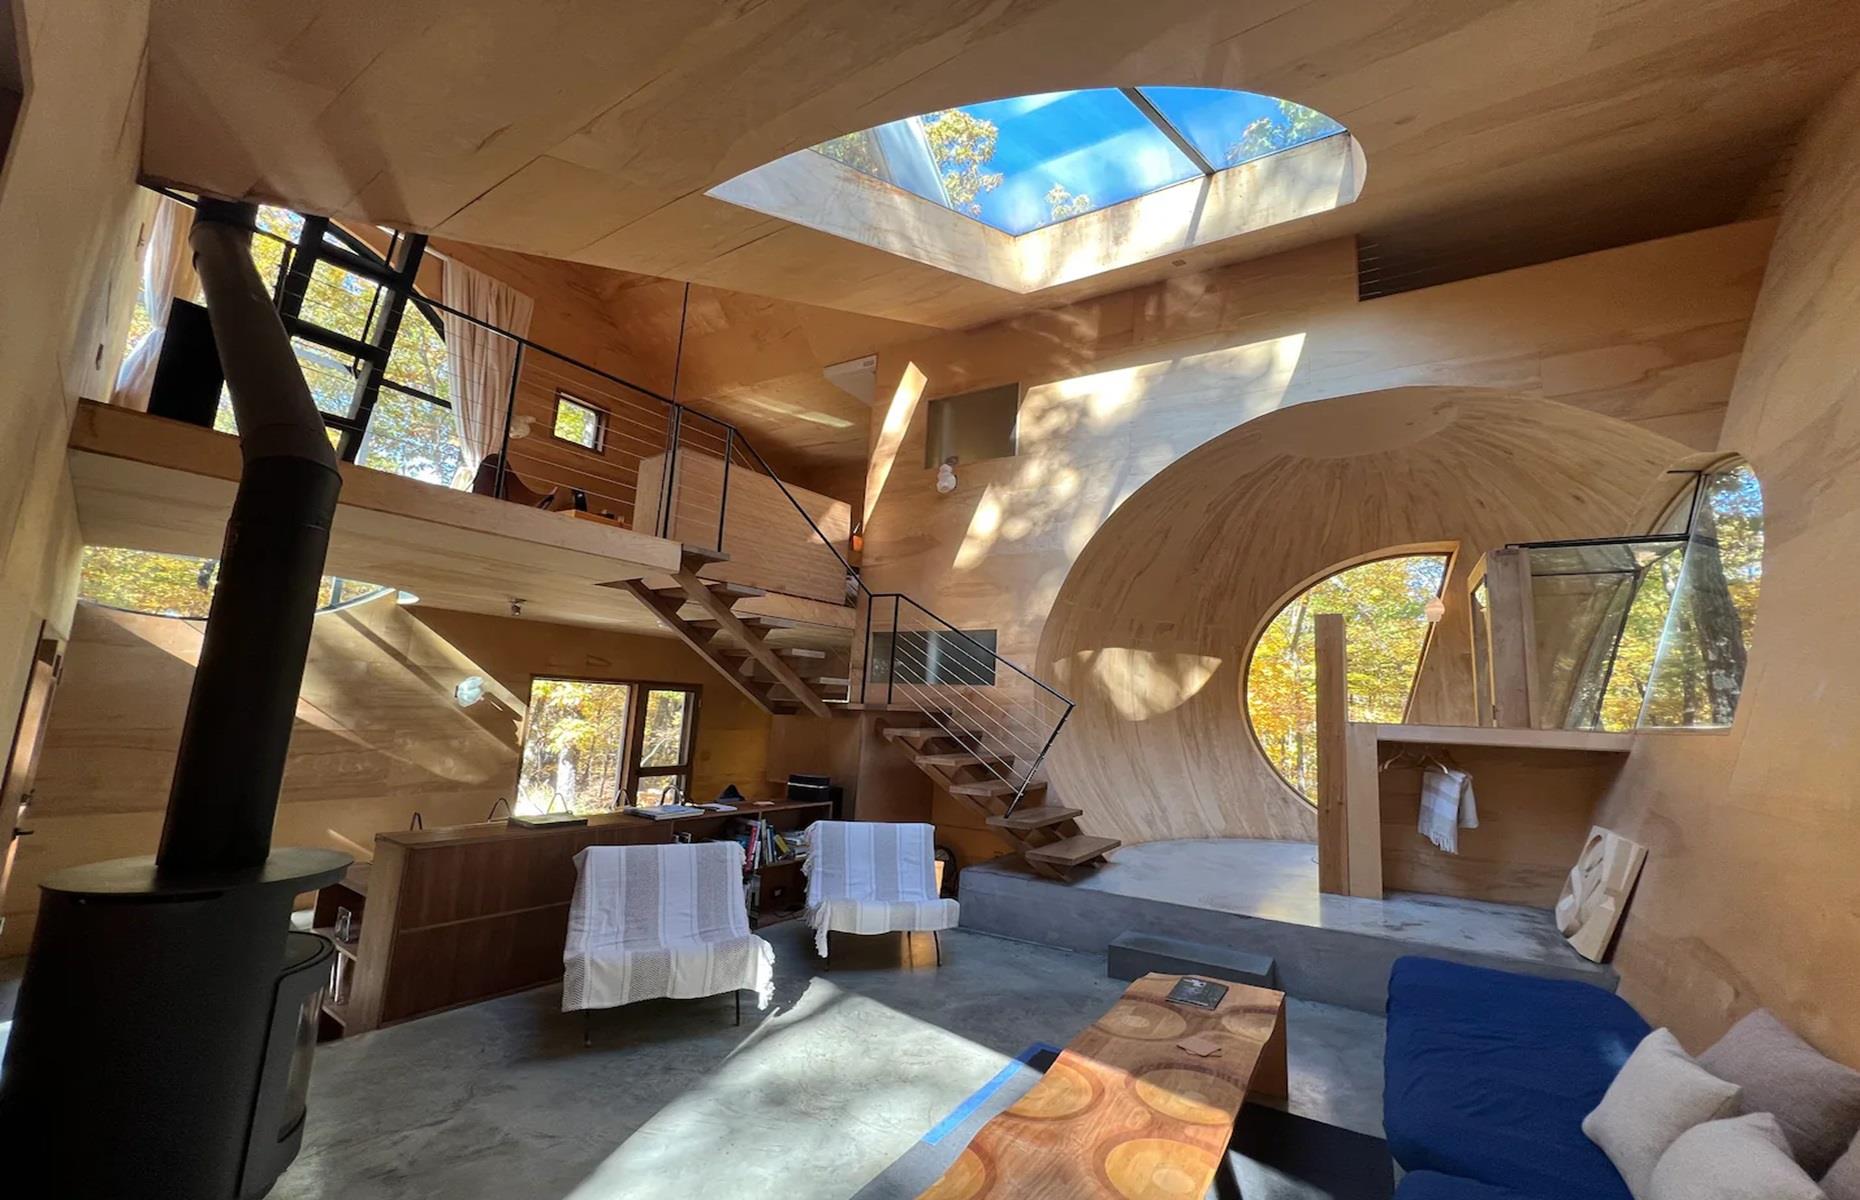 <p>The project aimed to create a unique vacation retreat that preserves the natural landscape and habitats around it. "Instead of building today’s typical 'McMansion' of several thousand square feet", the architects instead opted to create a single house of just 918 square feet, with three spherical voids at its centre, resulting in a truly unusual interior.</p>